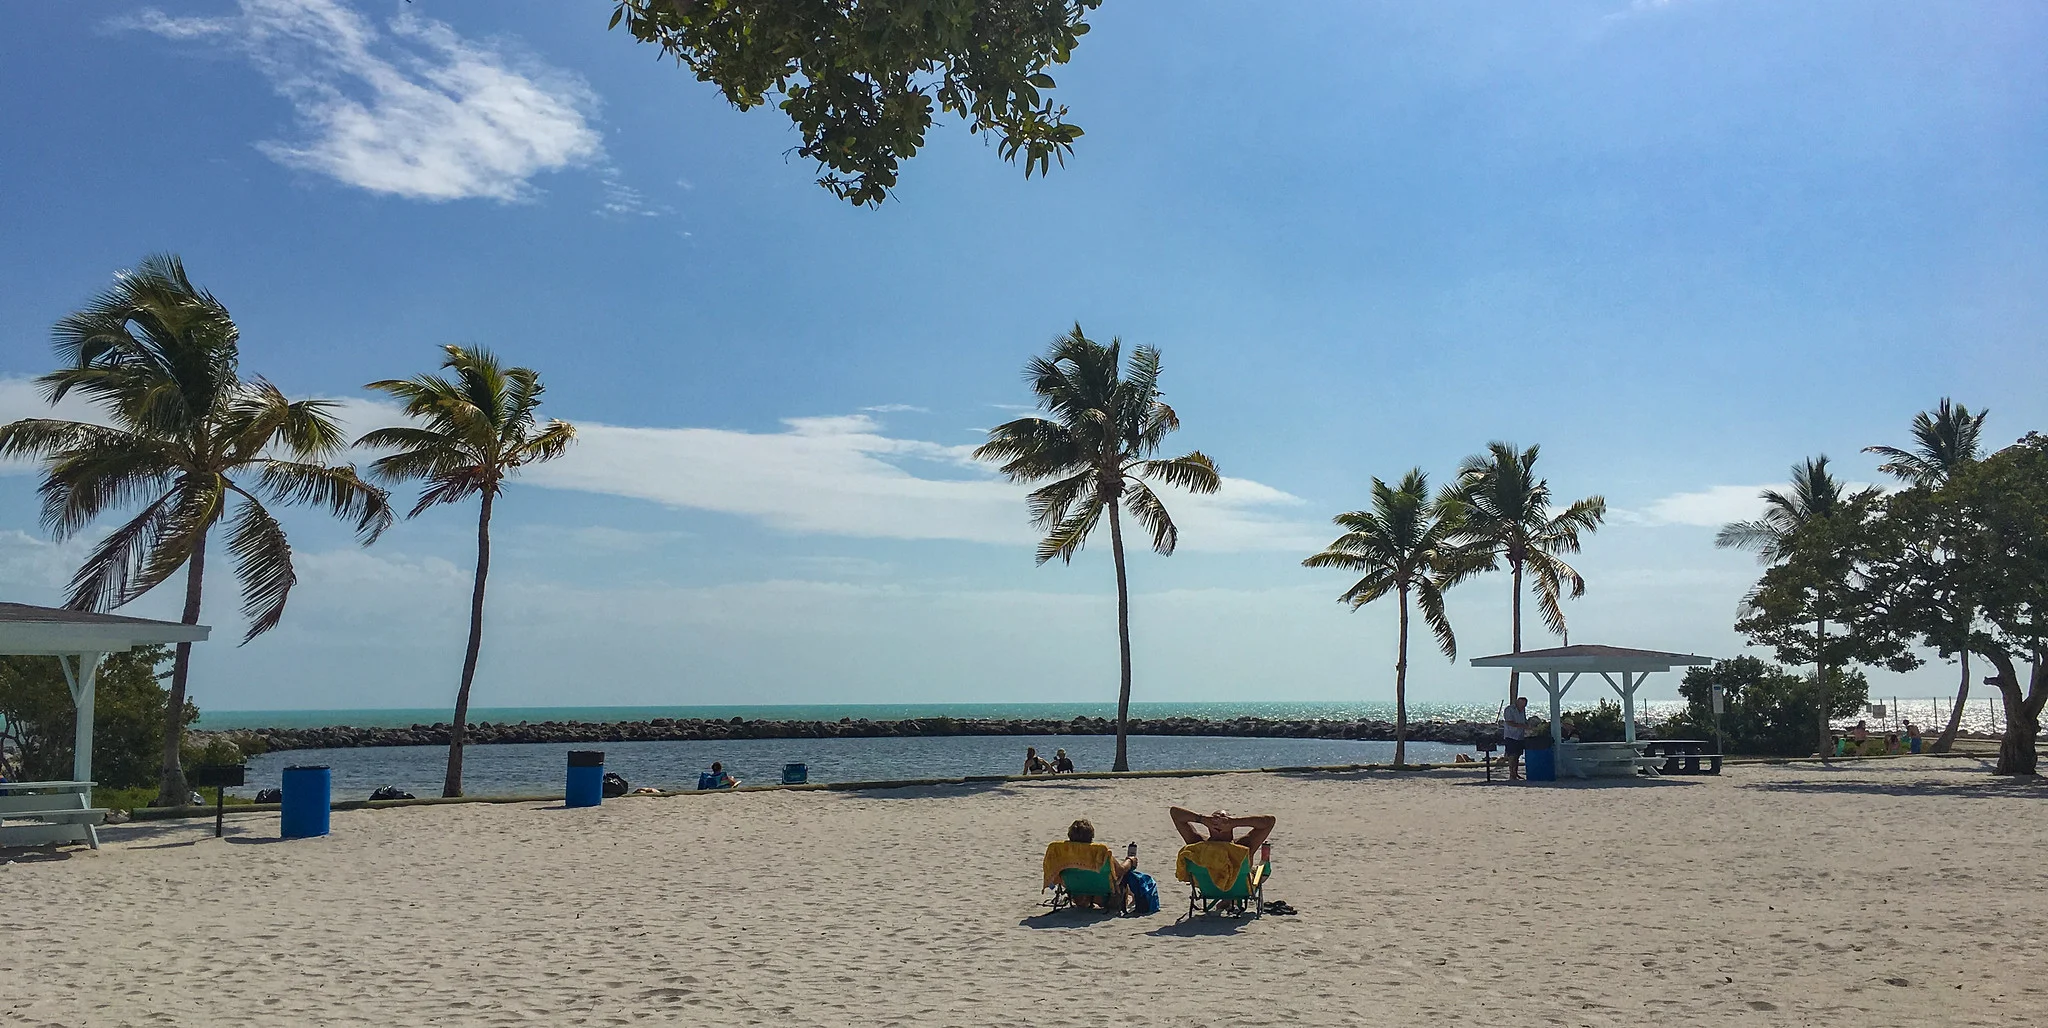 One of the best beaches on the Florida Keys: The beach at Harry Harris Park. (Photo courtesy Monroe County Parks)